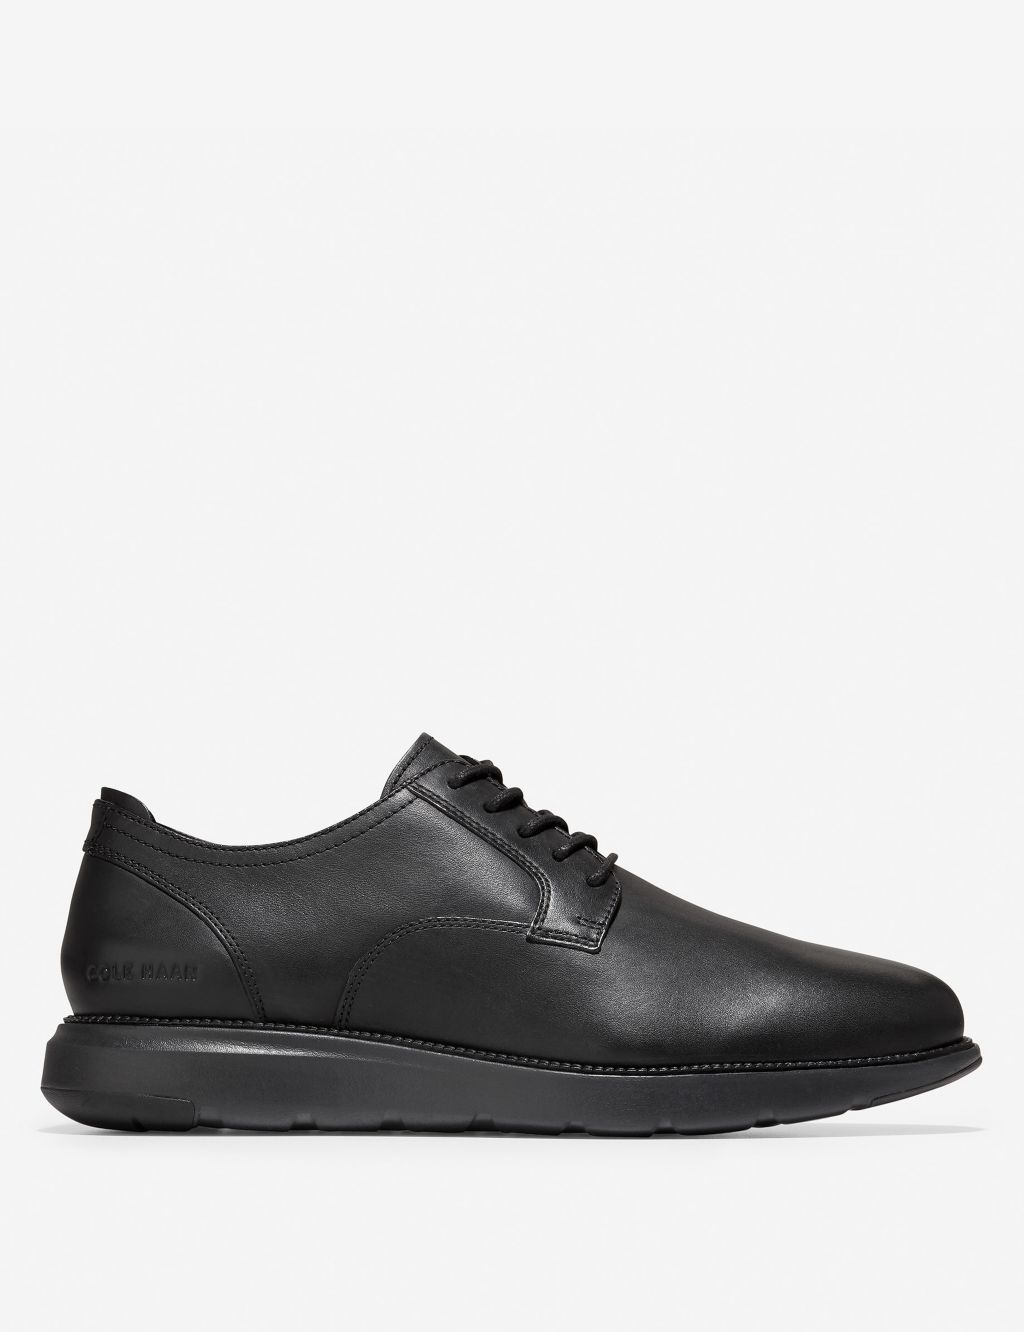 Grand Atlantic Leather Oxford Shoes image 1